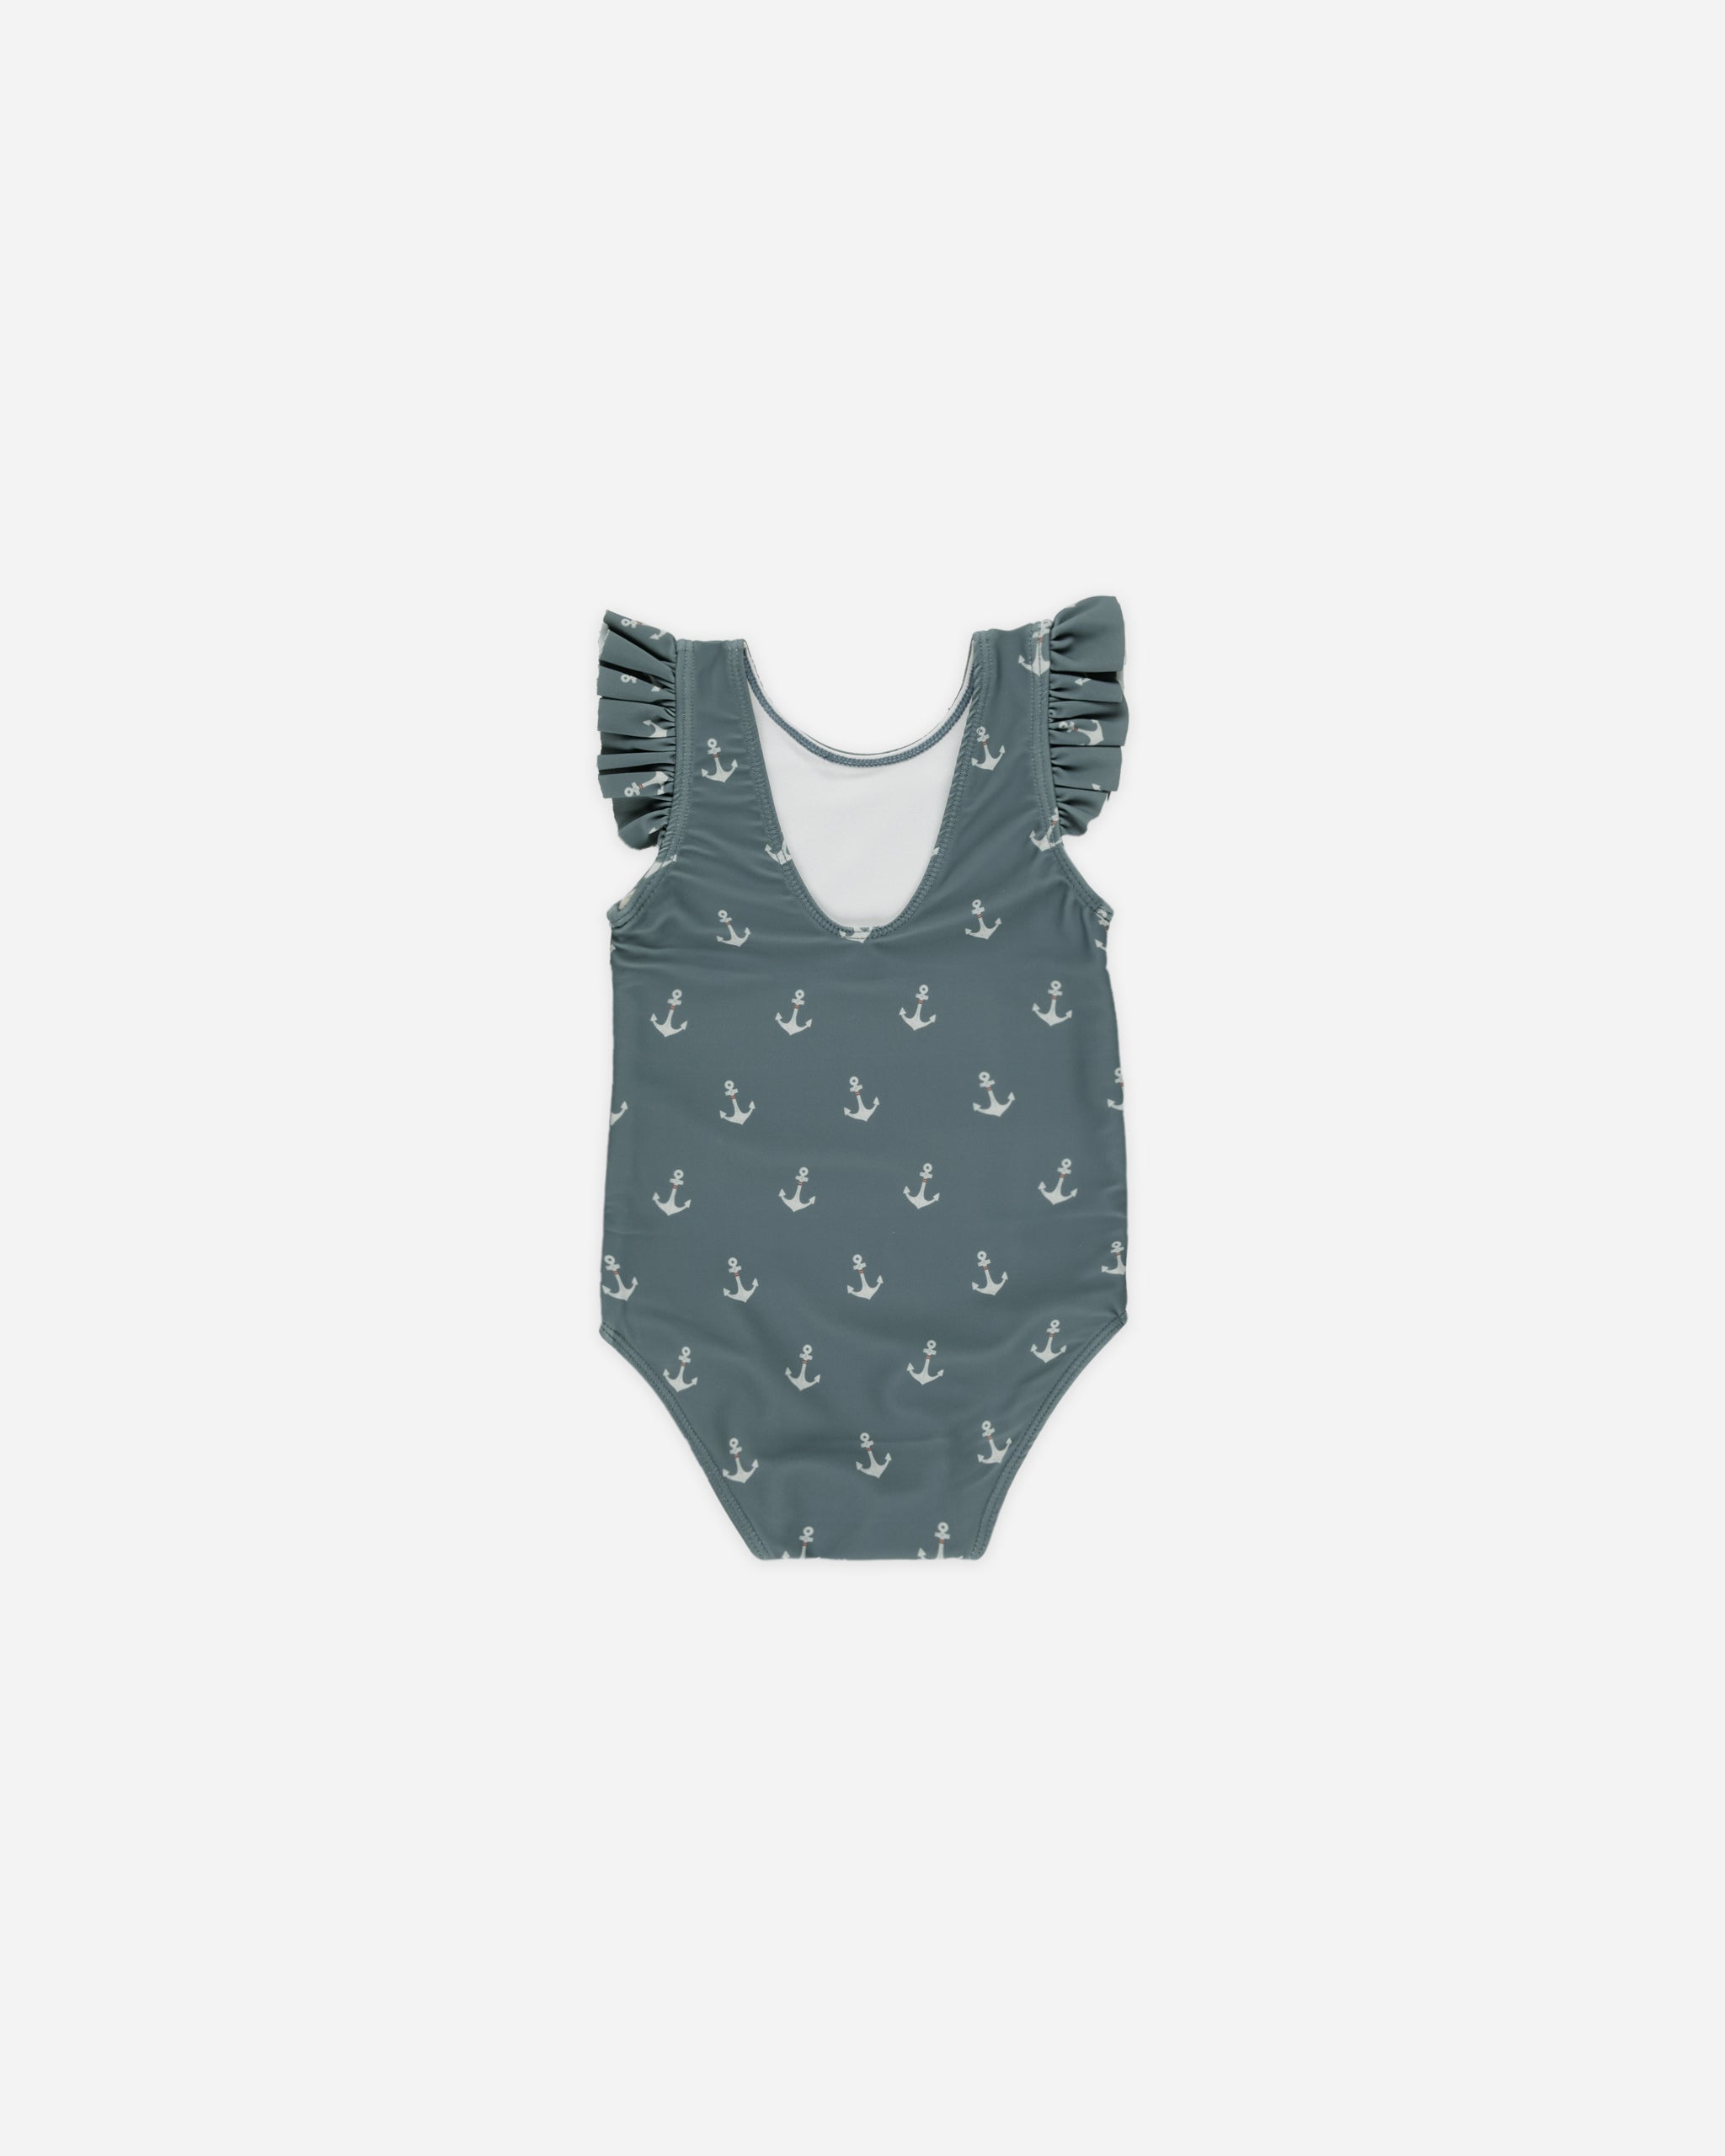 Scoop Back Onepiece || Anchors - Rylee + Cru | Kids Clothes | Trendy Baby Clothes | Modern Infant Outfits |